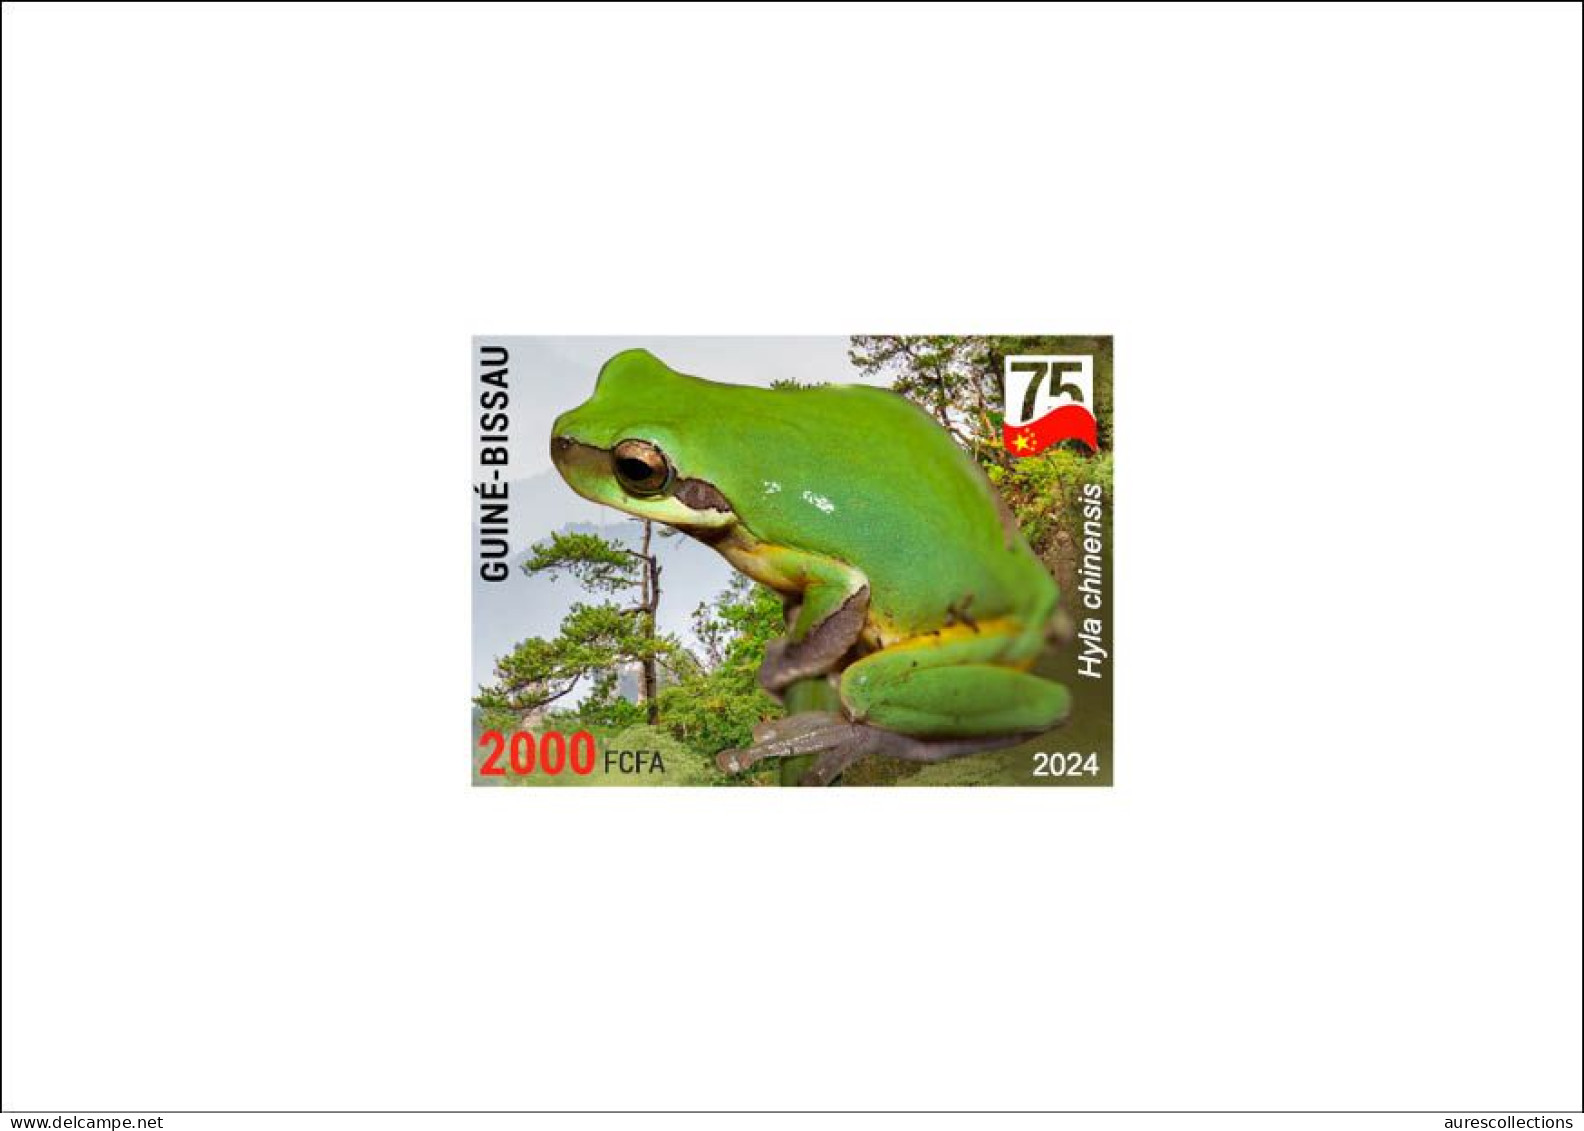 GUINEA BISSAU 2024 DELUXE PROOF - CHINA AMPHIBIANS & REPTILES - CHINESE TREE FROG FROGS GRENOUILLES - CHINA 75 ANNIV. - Ranas